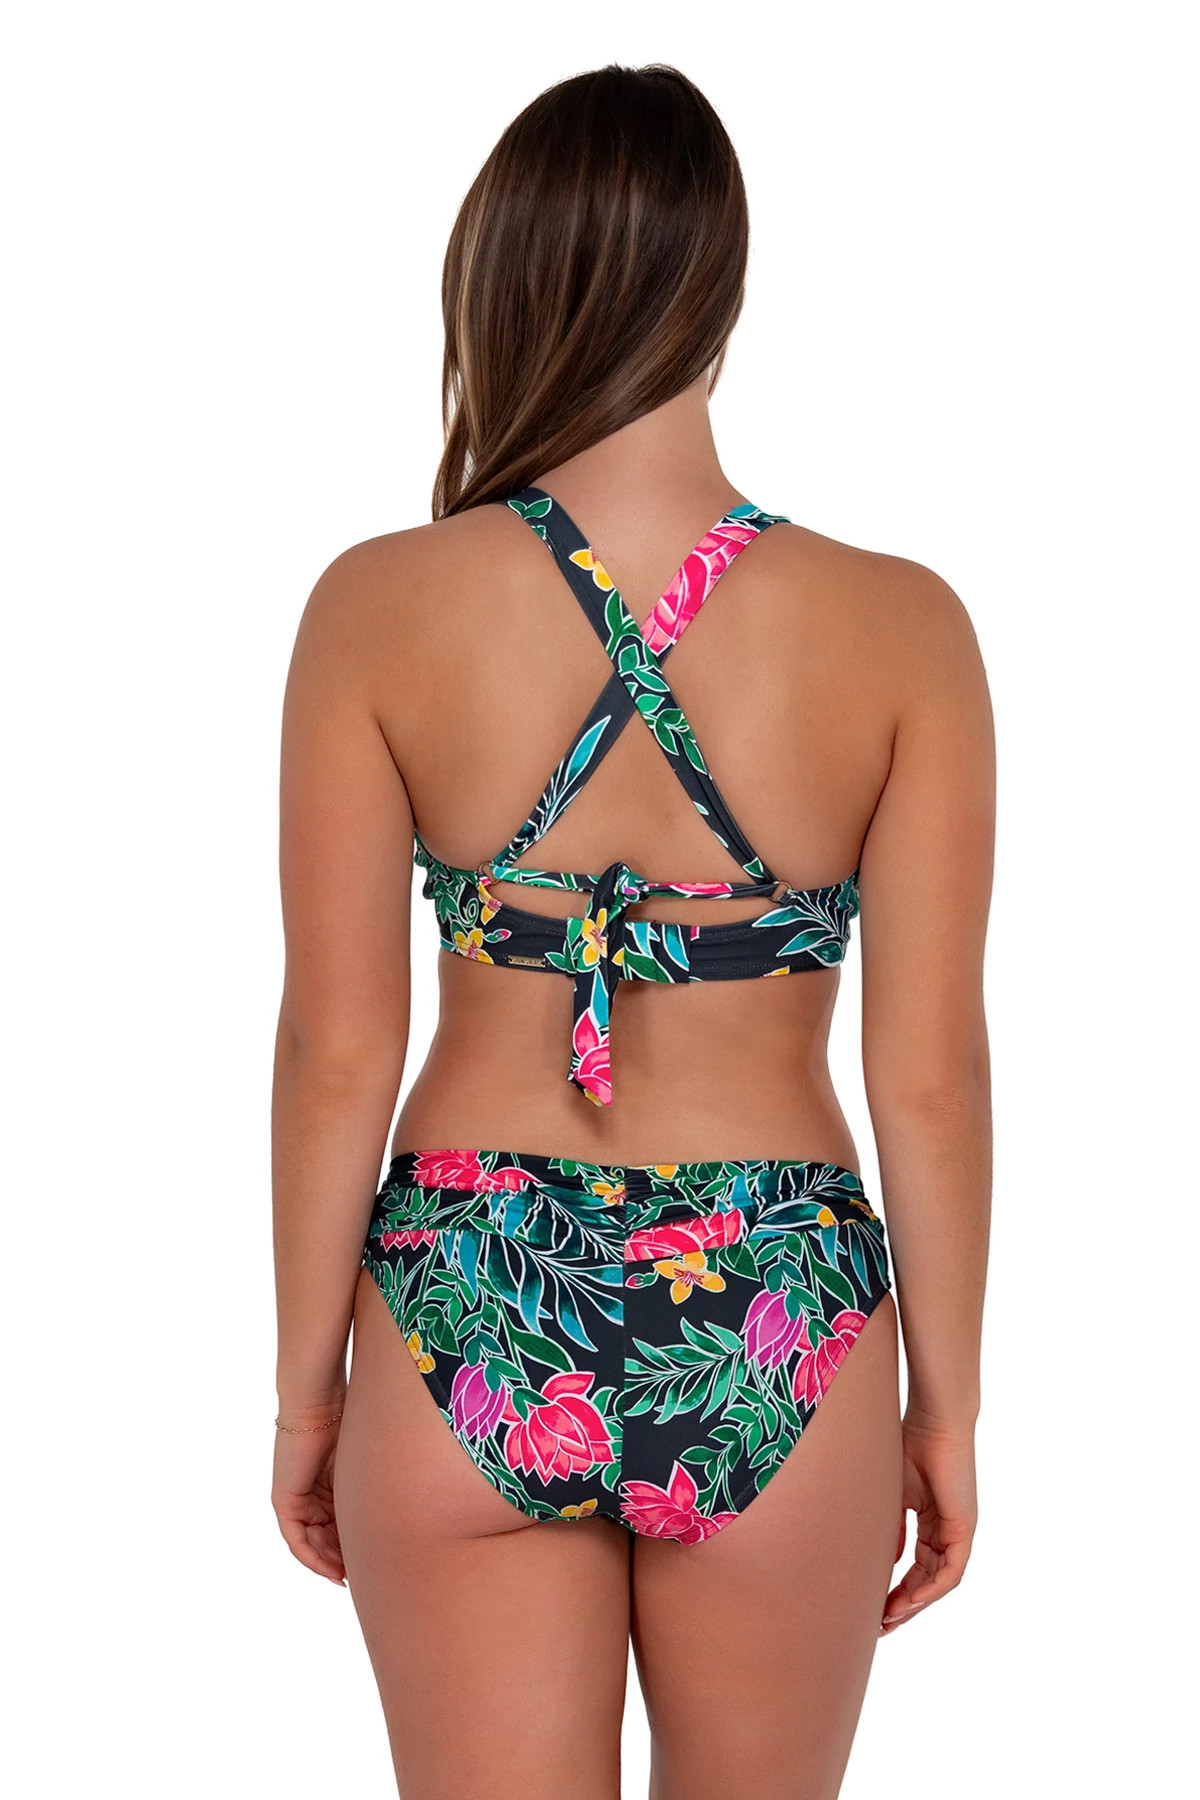 TWILIGHT BLOOMS Vienna V-Wire Bikini Top (E-H Cup) image number 2